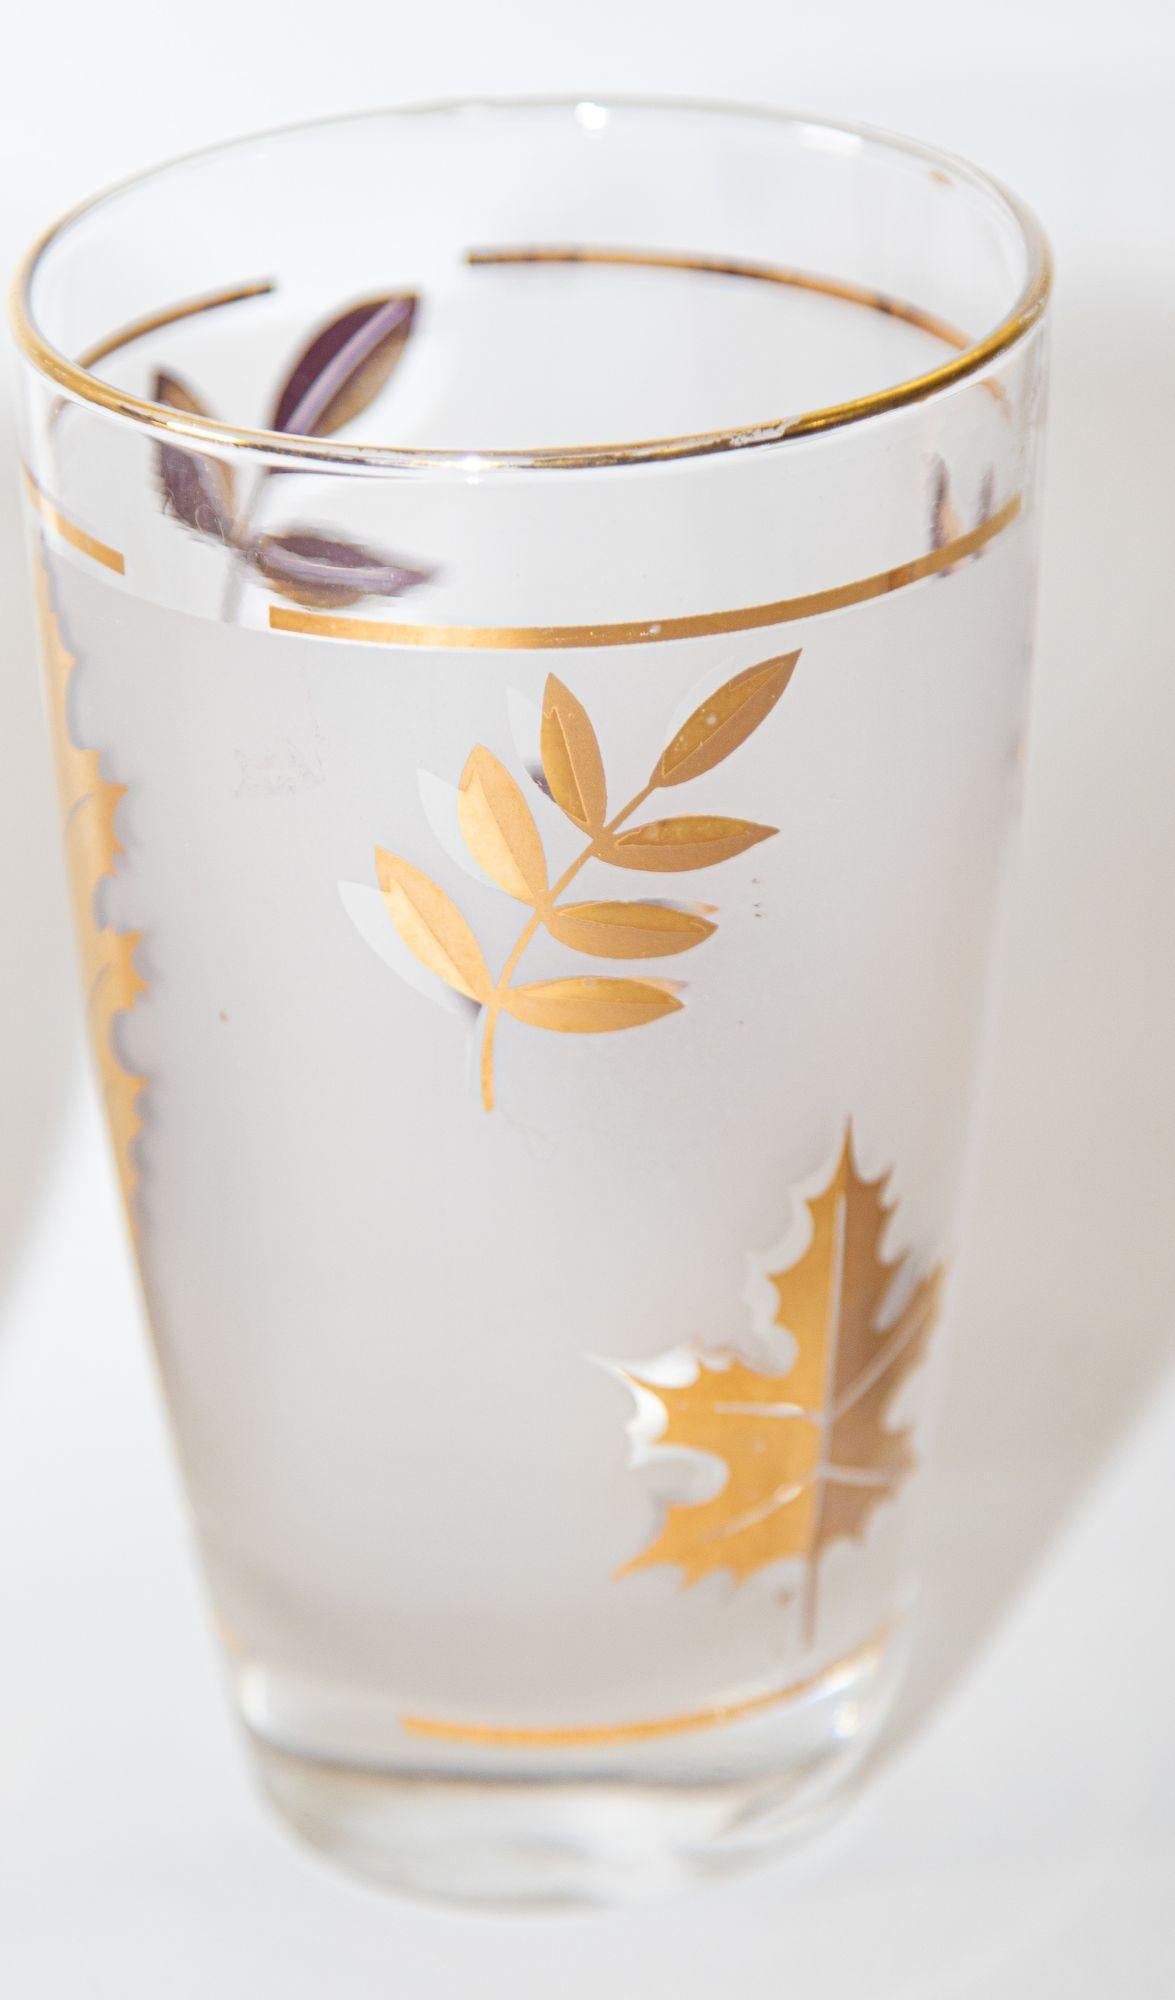 American Vintage Libbey Frosted & Golden Foliage Cocktail Glasses, Set of 4 For Sale